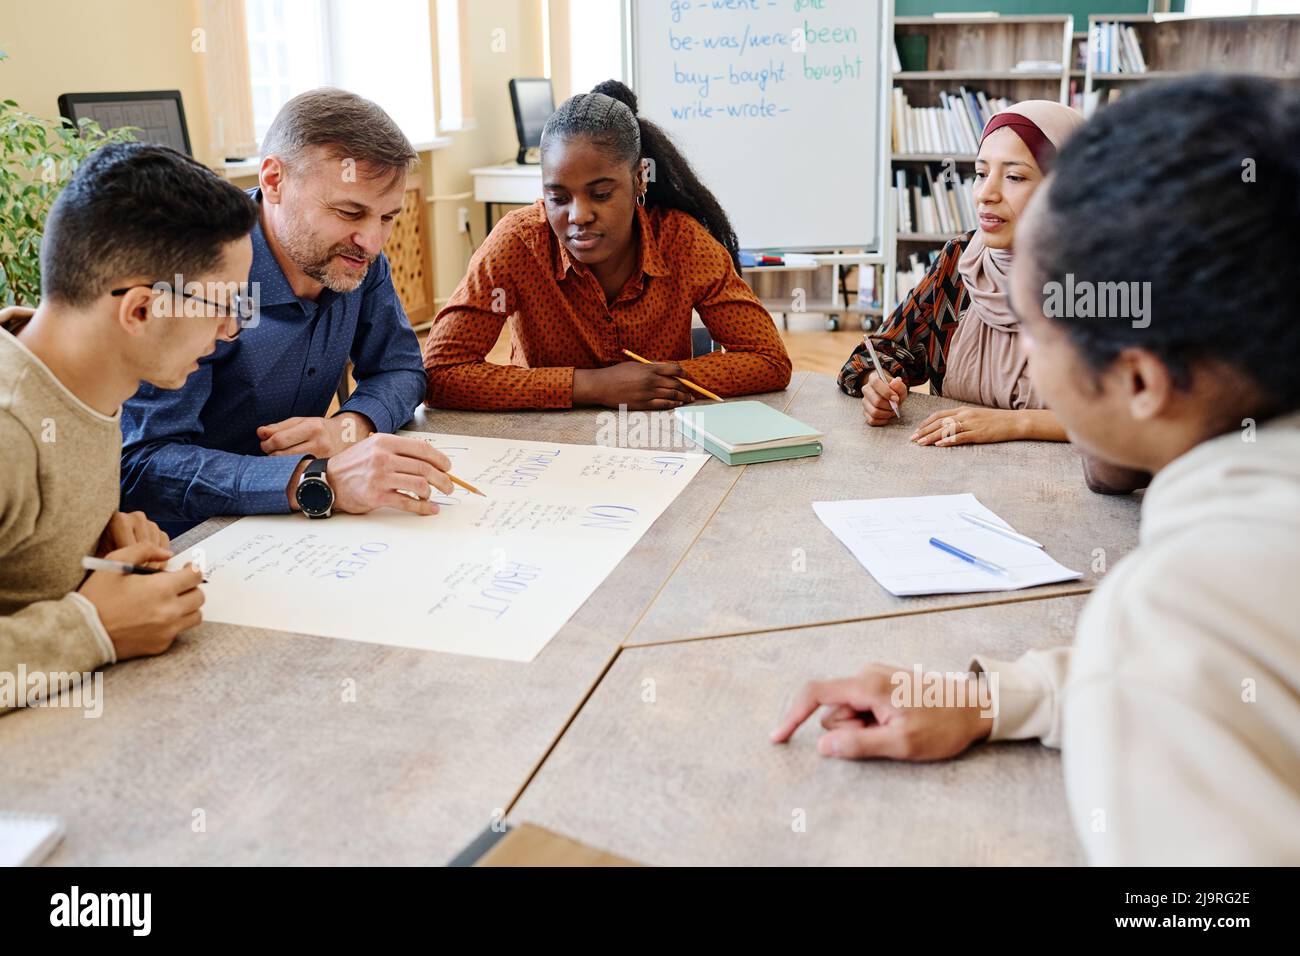 English language teacher sitting at table with his students checking spelling of words on poster they created Stock Photo